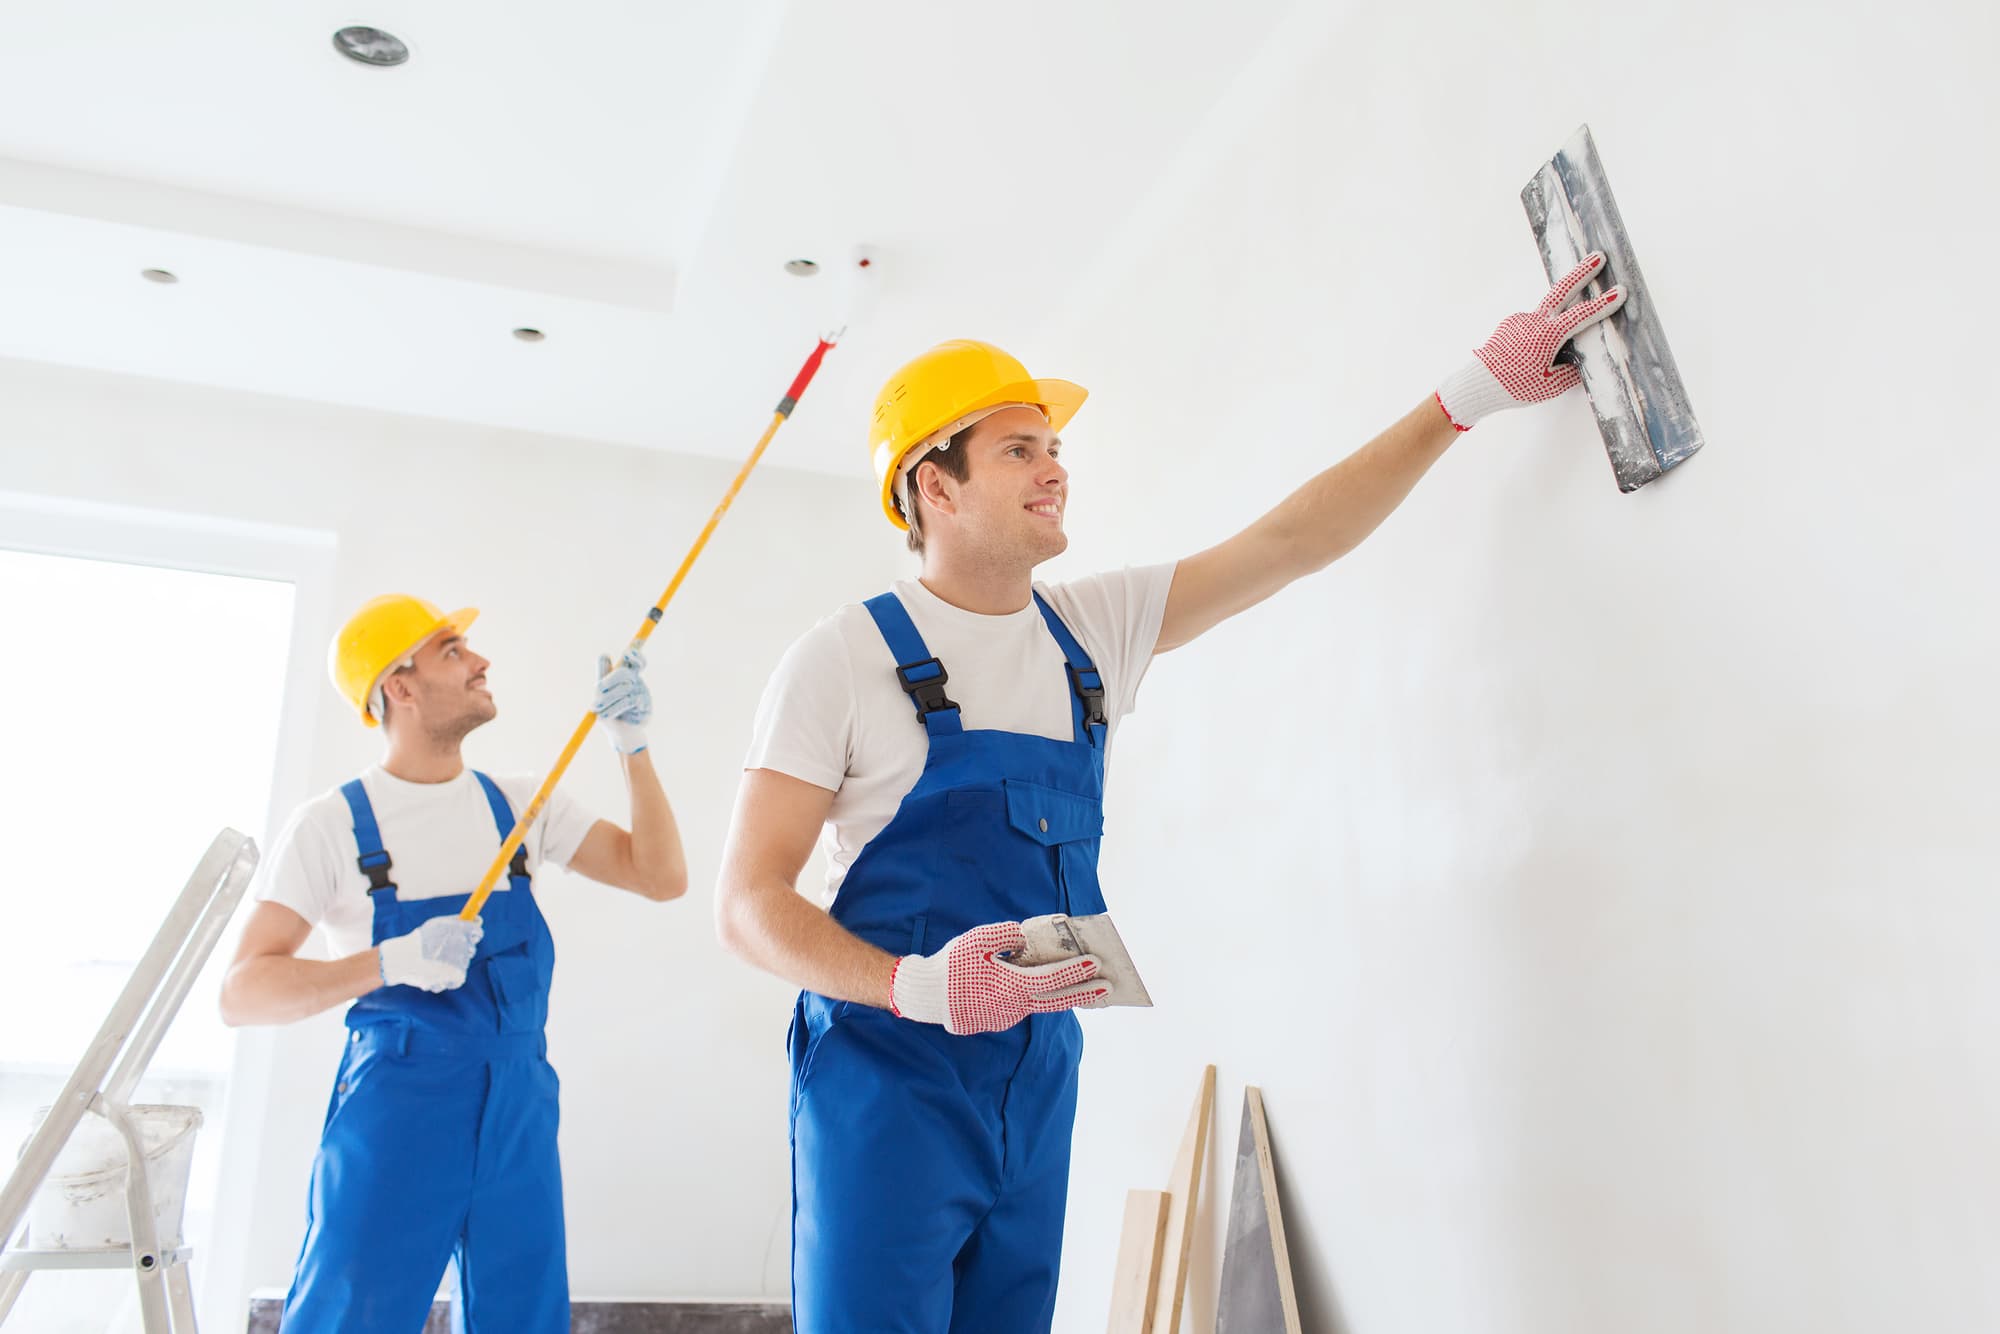 Professional Painters-Pearland TX Professional Painting Contractors-We offer Residential & Commercial Painting, Interior Painting, Exterior Painting, Primer Painting, Industrial Painting, Professional Painters, Institutional Painters, and more.